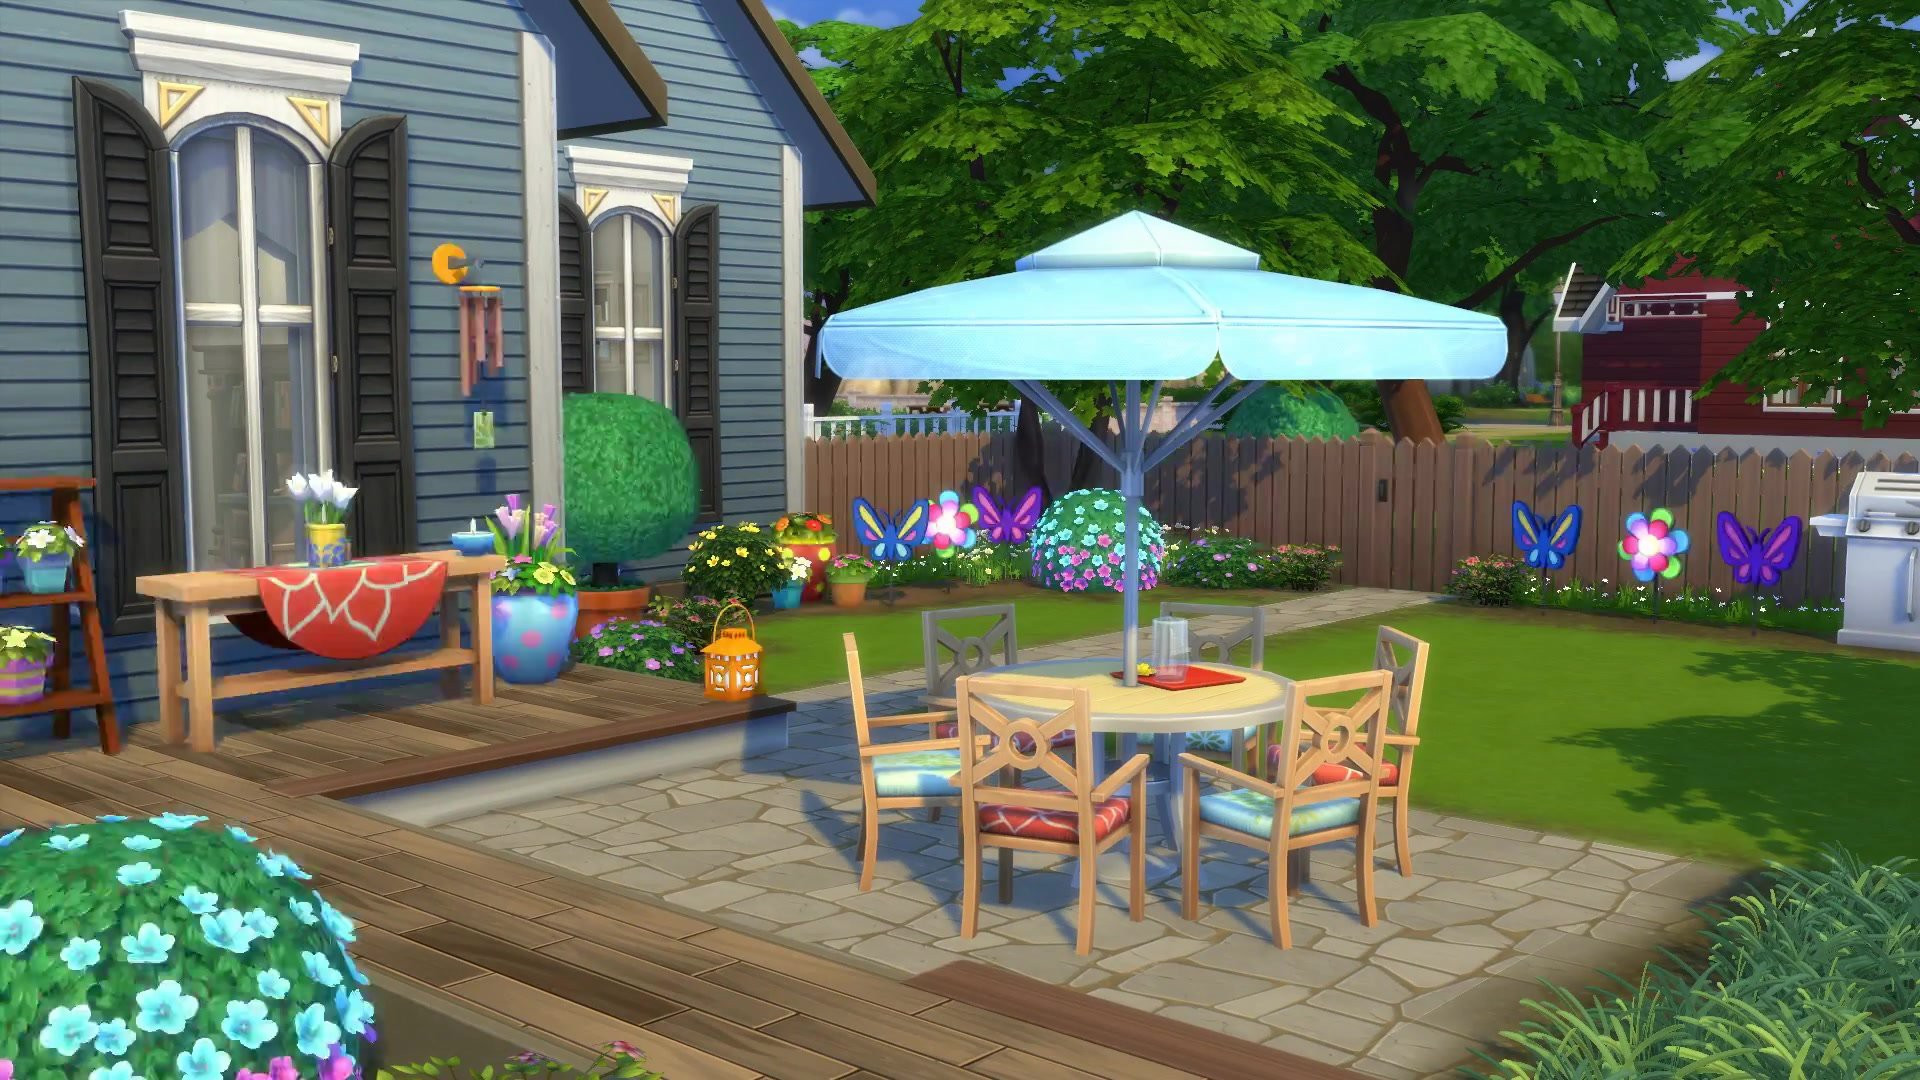 20 Of the Best Ideas for Sims 4 Backyard Stuff - Best Collections Ever